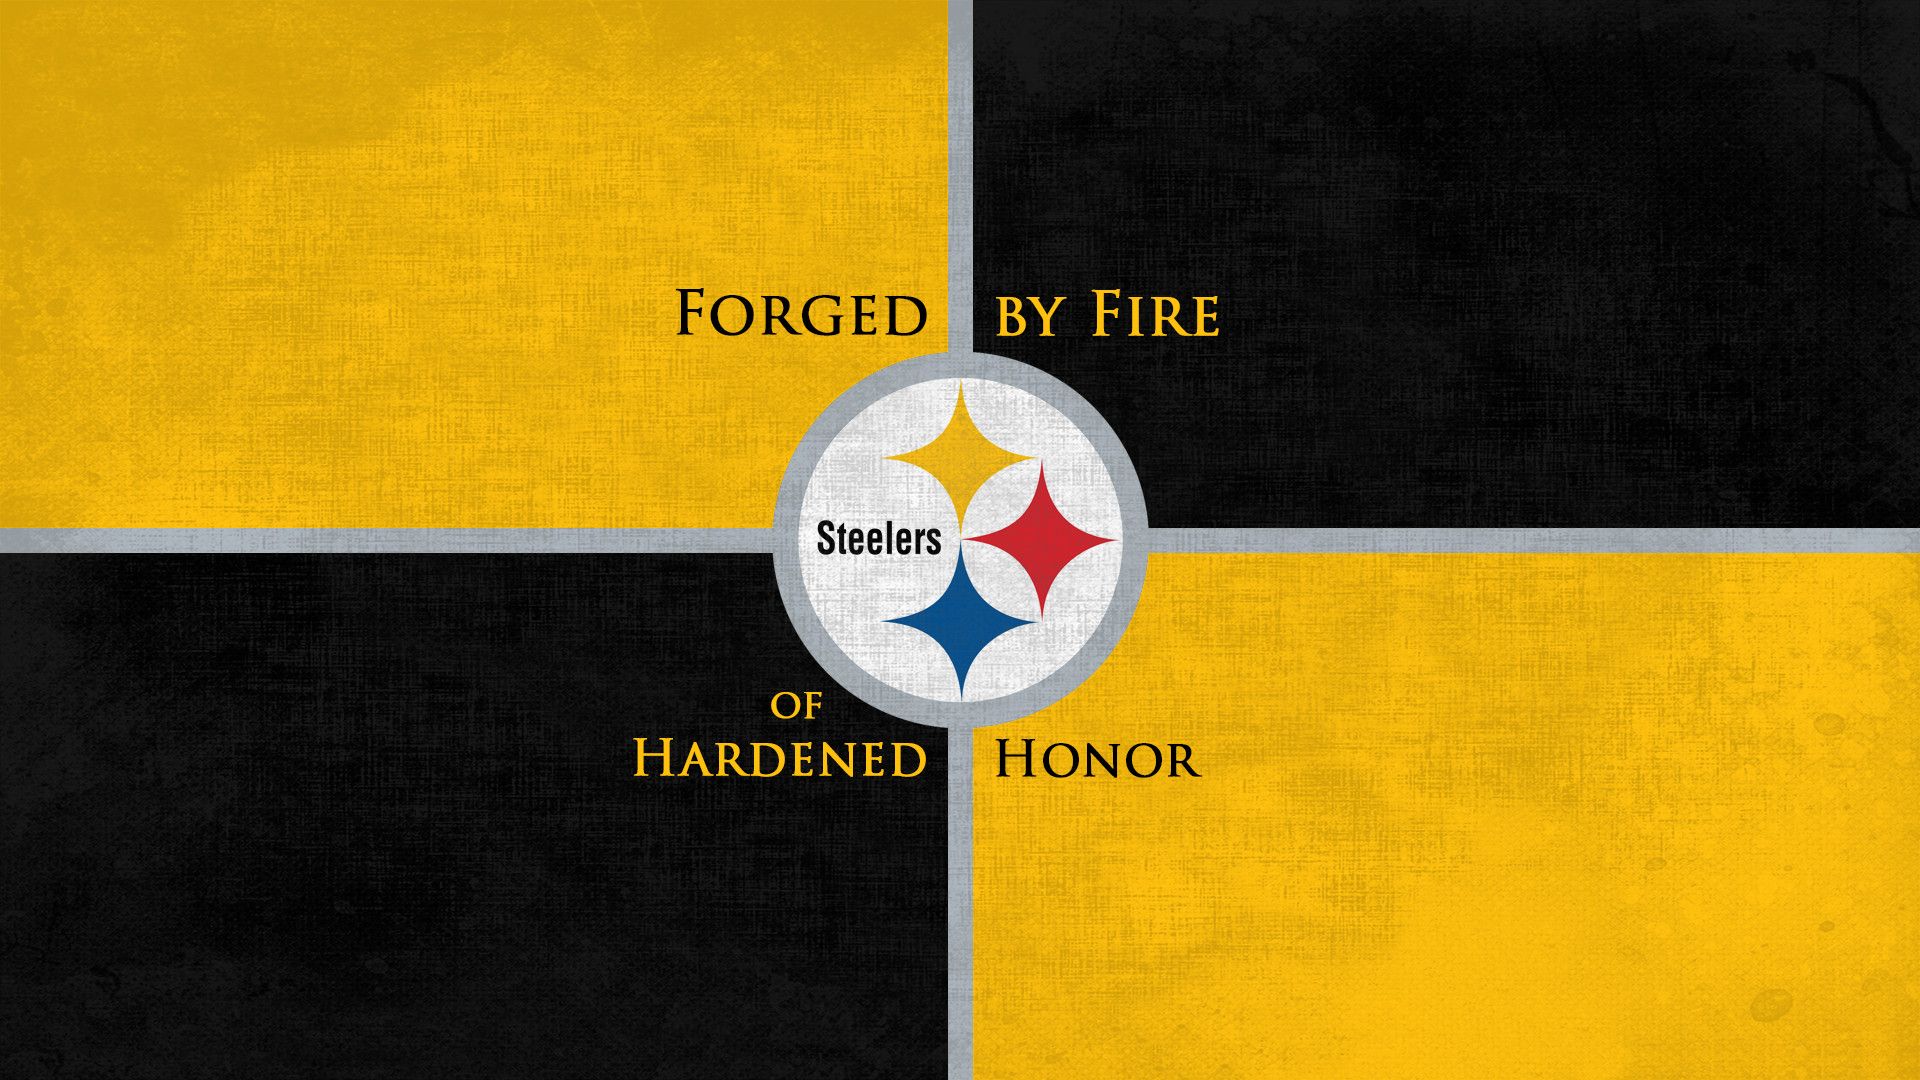 Anyone have a really good phone background steelers